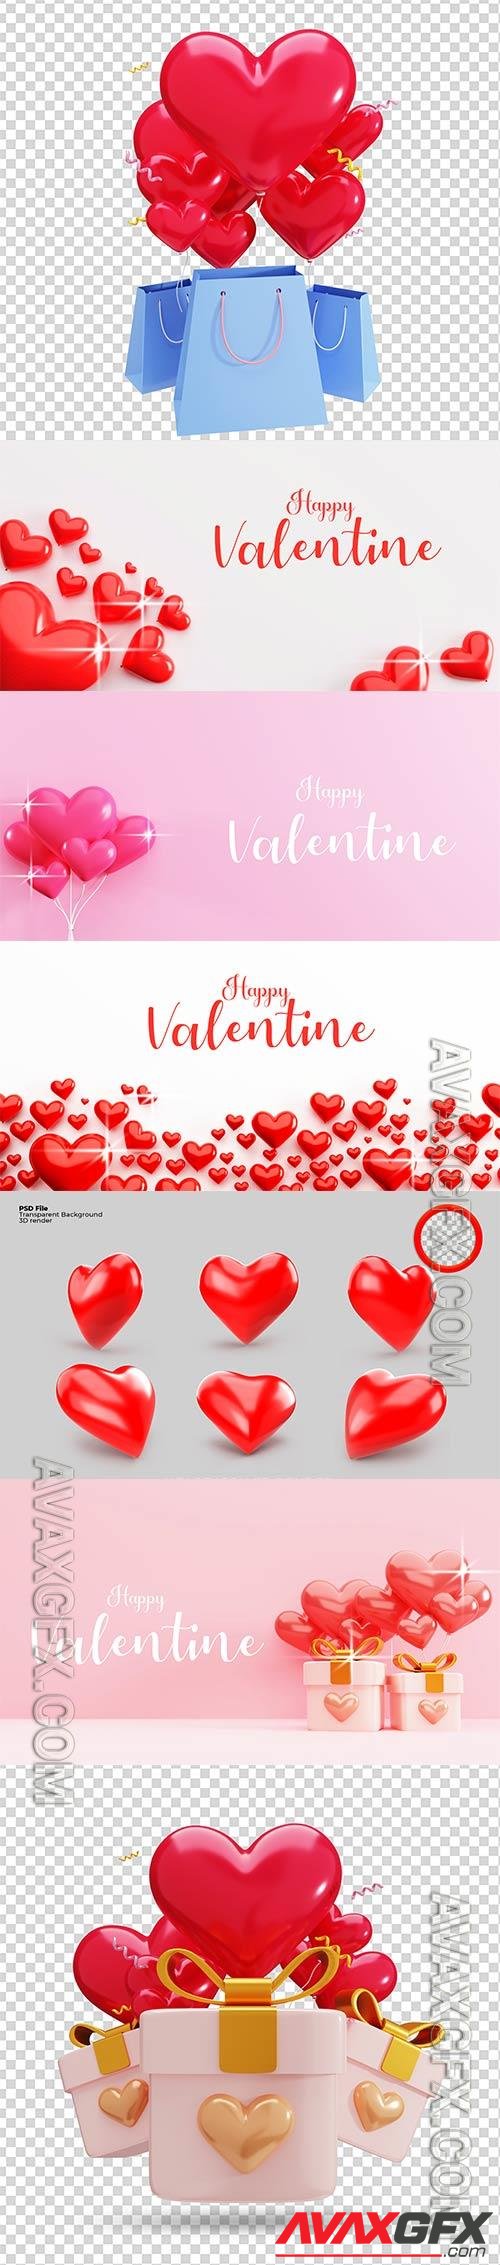 3d rendering of valentine concept background psd